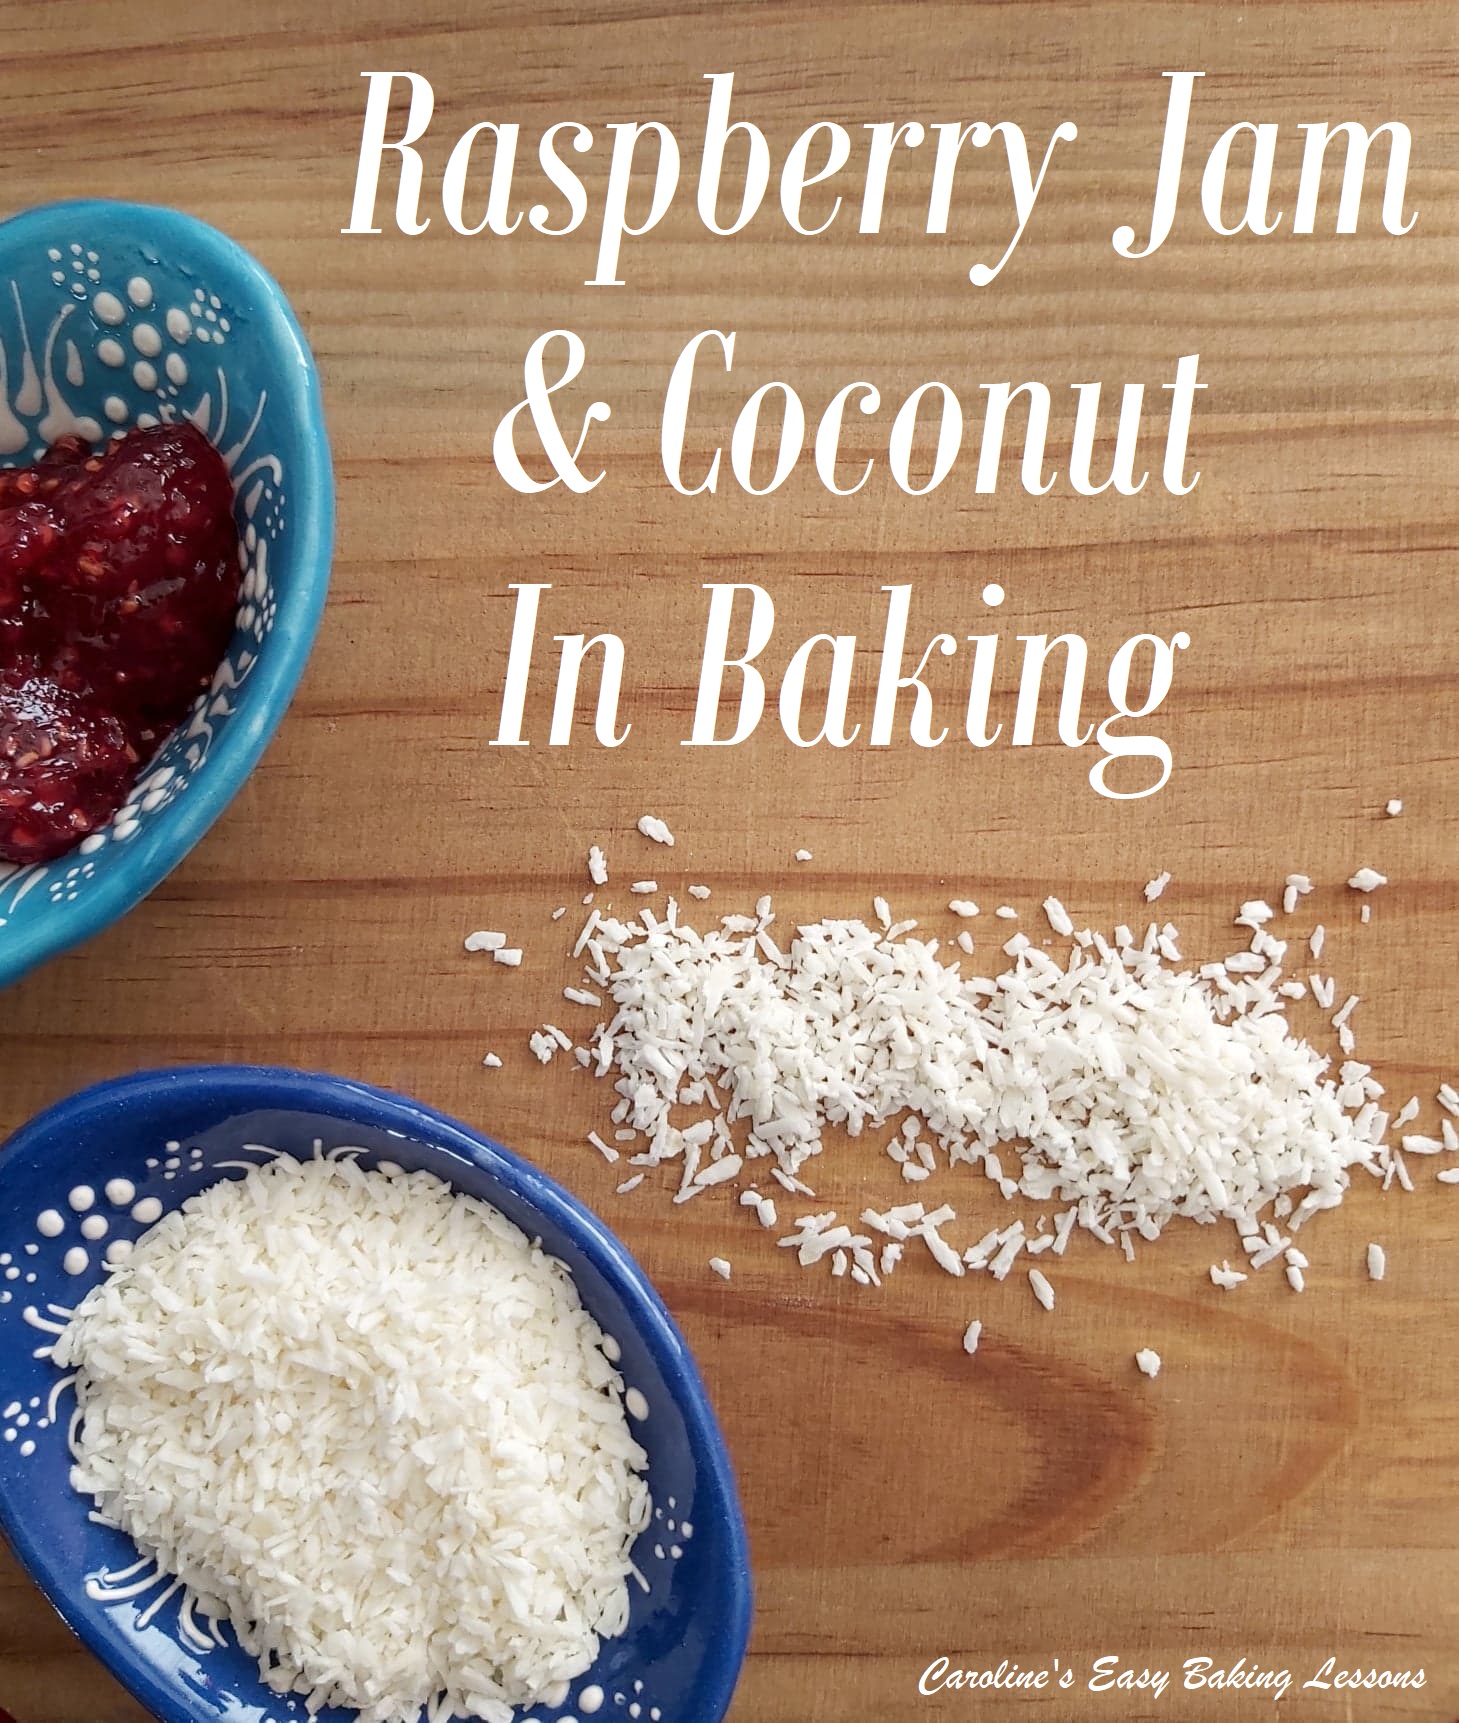 RASPBERRY JAM & COCONUT RECIPES – Simply The Best Cupboard Ingredients For Baking With